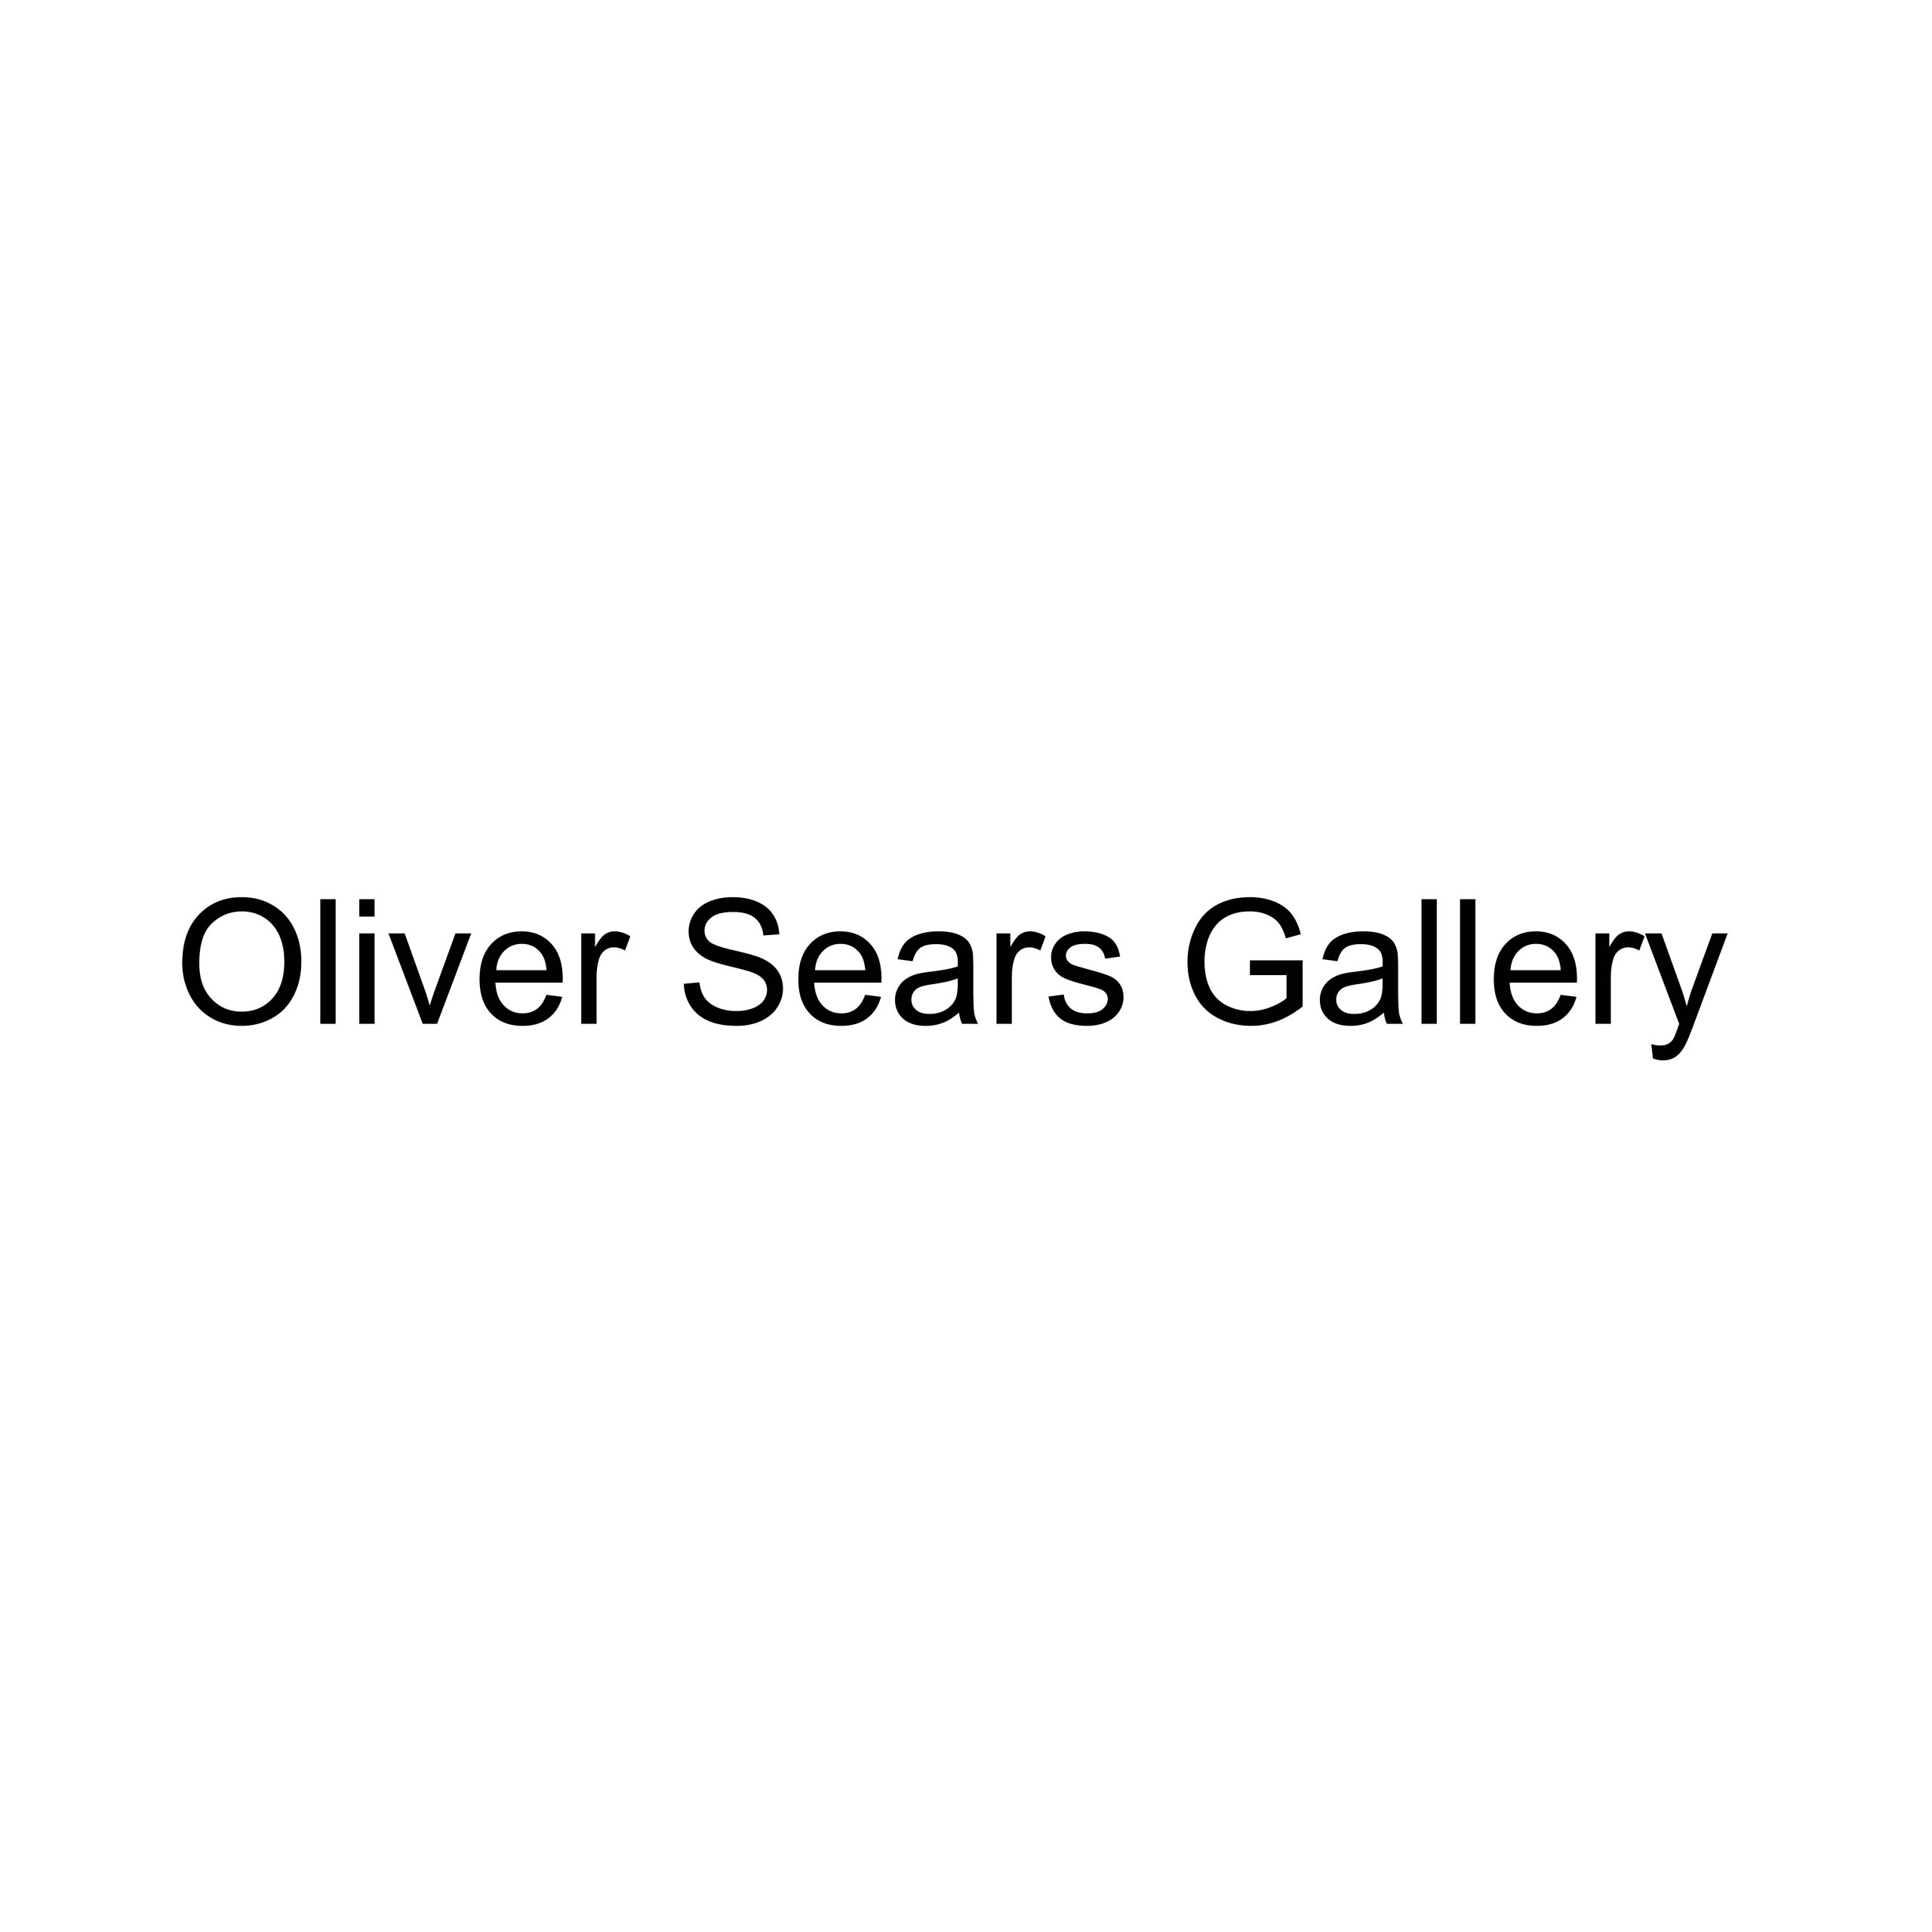 Oliver Sears Gallery placeholder logo